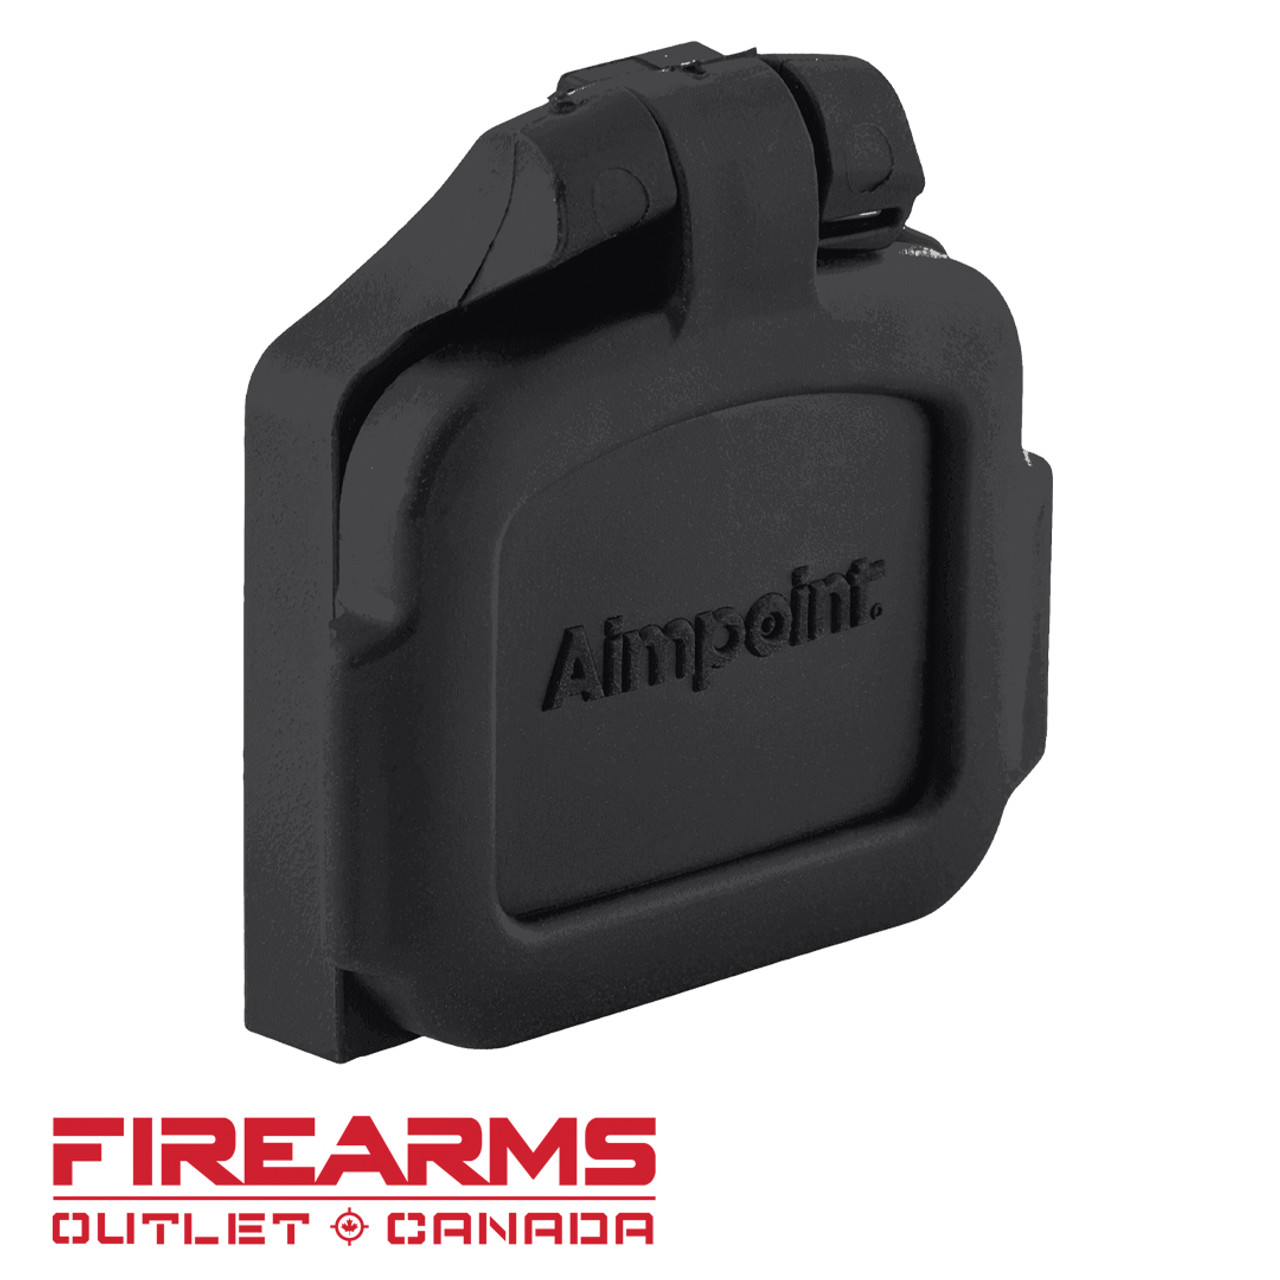 Aimpoint Lens Cover Flip-Up Front - Solid Black, Acro C-2/P-2 [200747]